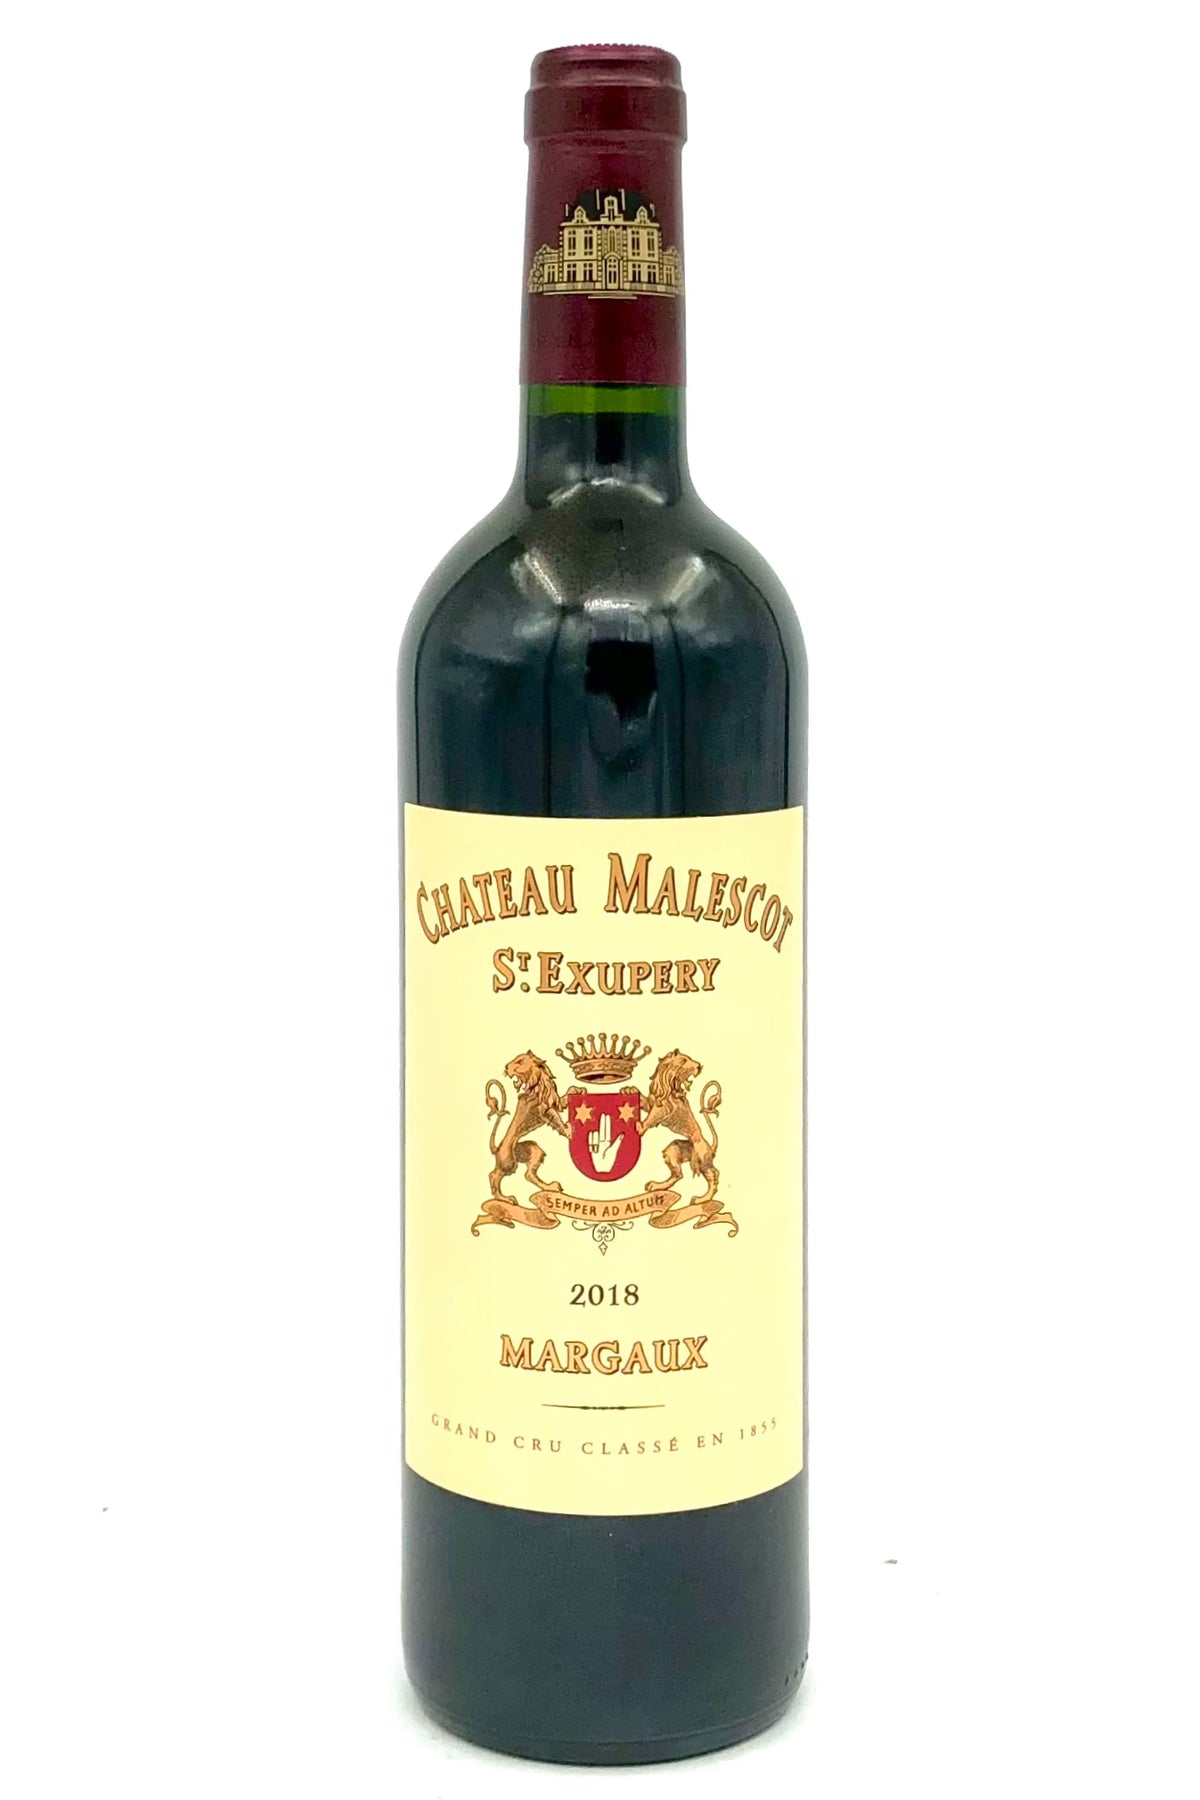 Chateau Malescot St. Exupery 2018 Margaux